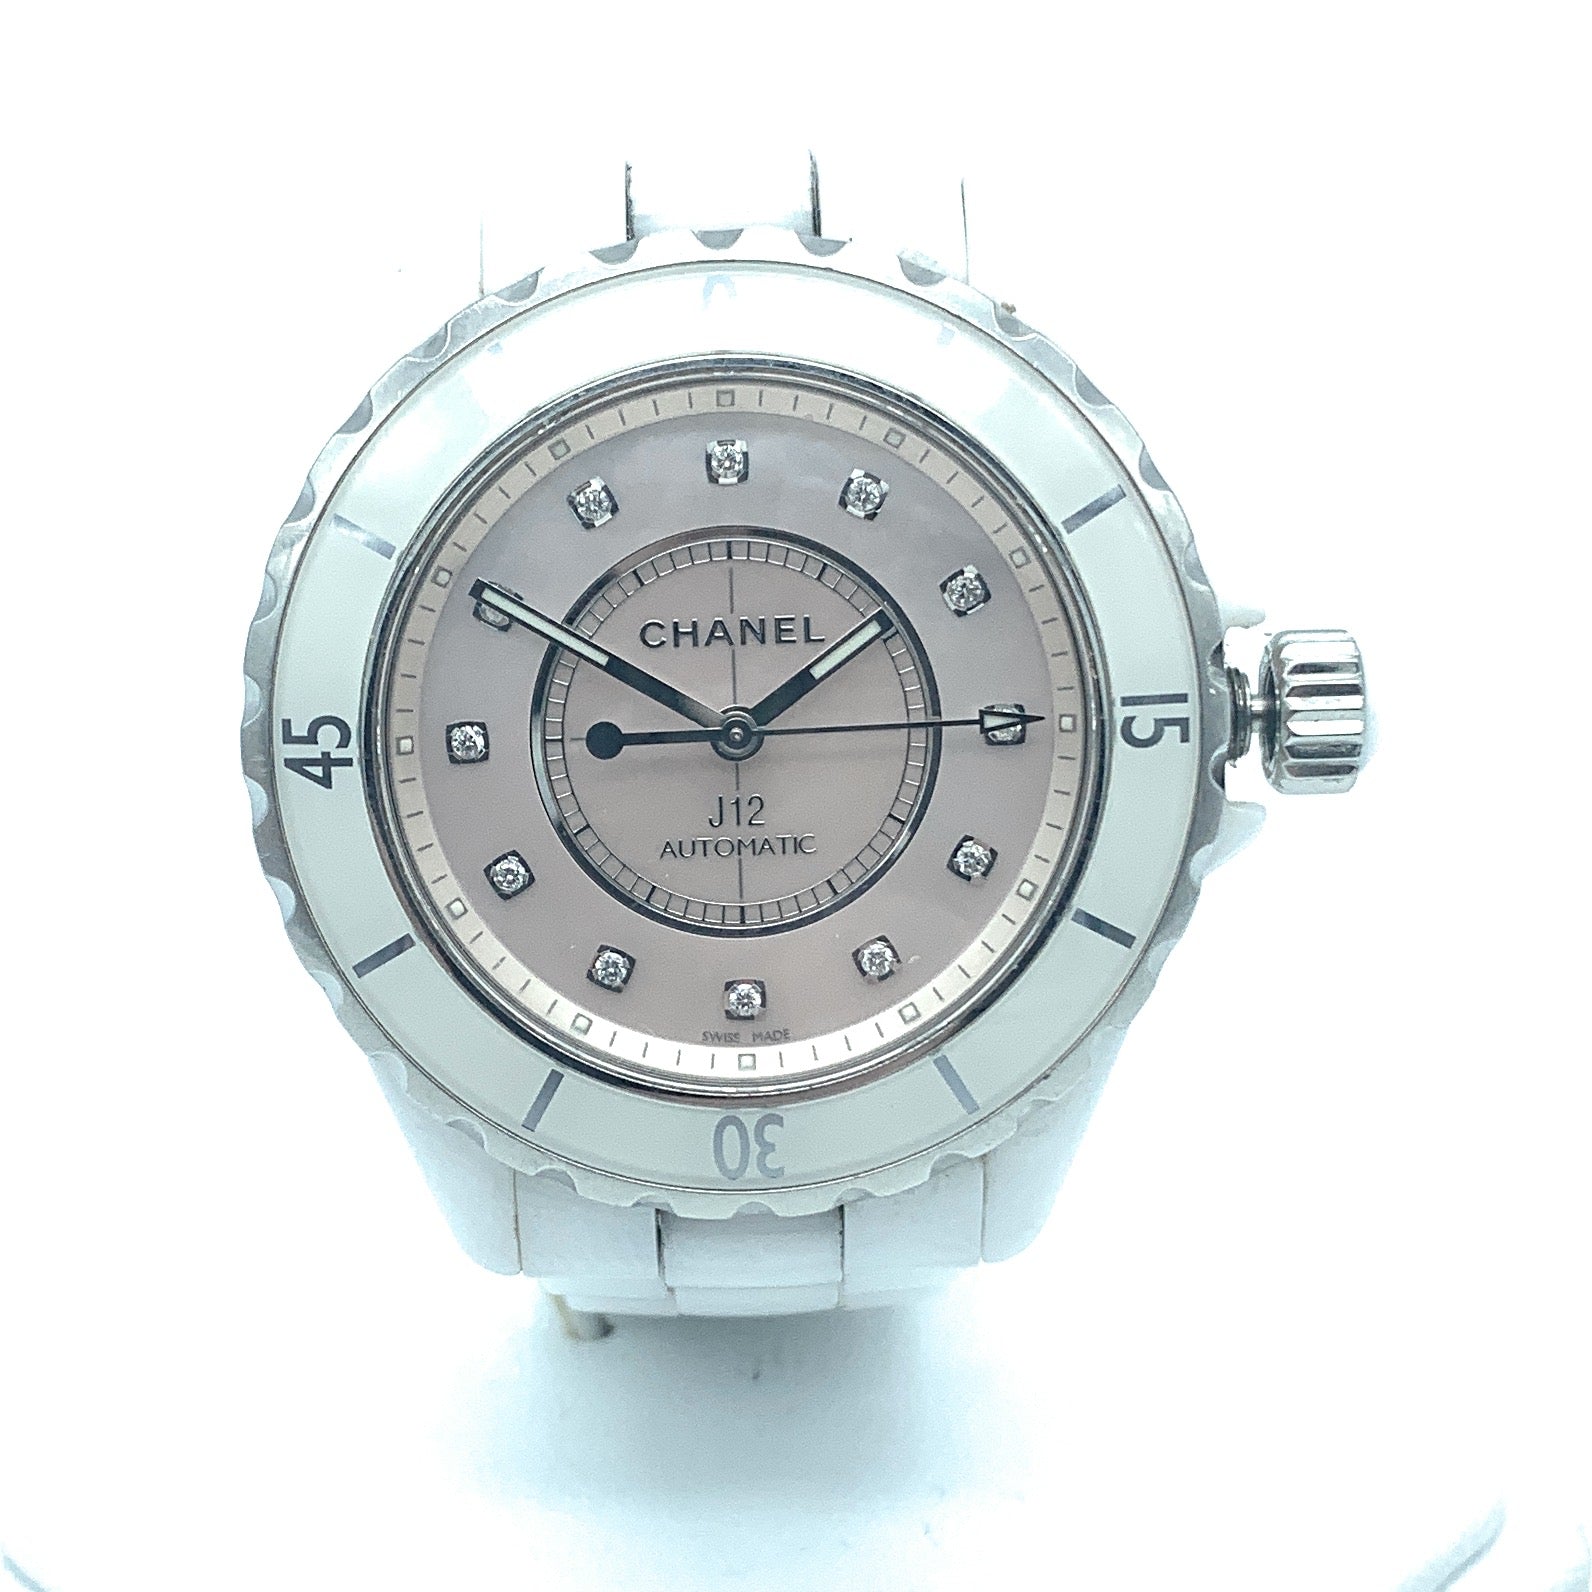 CHANEL Stainless Steel Ceramic 38mm J12 Automatic Watch White 1227570